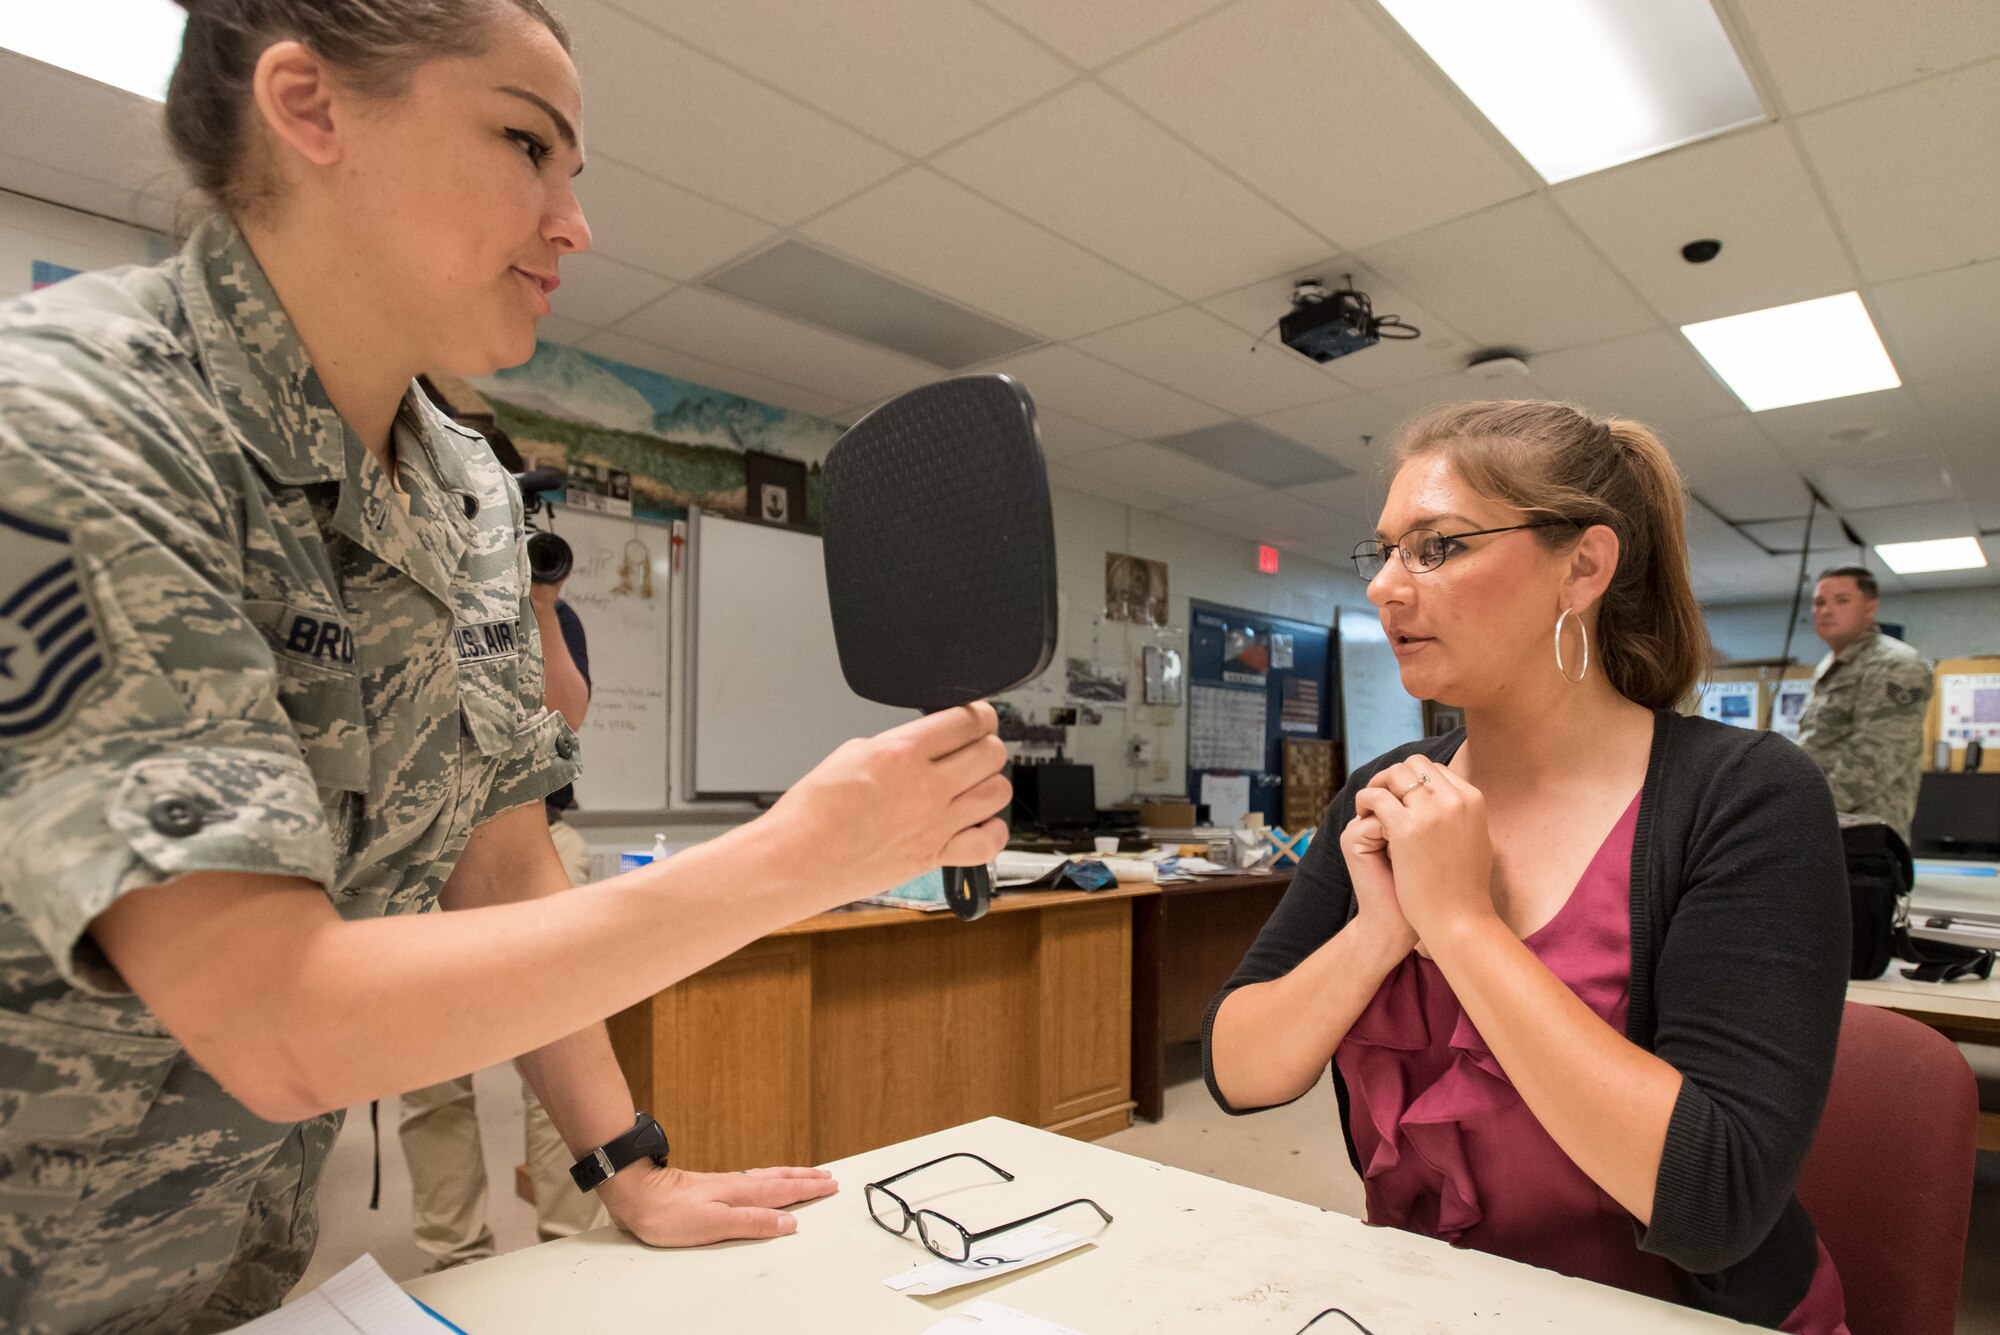 U.S. Air Force Master Sgt. Julie Brown (left), a medic from the Texas Air National Guard’s 136th Airlift Wing, helps Lindsey Howard of Richmond, Ky., select frames for a new pair of eyeglasses at a health-care clinic being operated by the Air Guard and U.S. Navy Reserve at Estill County High School in Irvine, Ky., June 21, 2018. The clinic is one of four that comprised Operation Bobcat, a 10-day mission to provide military medical troops with crucial training in field operations and logistics while offering no-cost health care to the residents of Eastern Kentucky. The clinics, which operated from June 15-24, offered non-emergent medical care; sports physicals; dental cleanings, fillings and extractions; eye exams and no-cost prescription eye glasses. (U.S. Air National Guard photo by Lt. Col. Dale Greer)